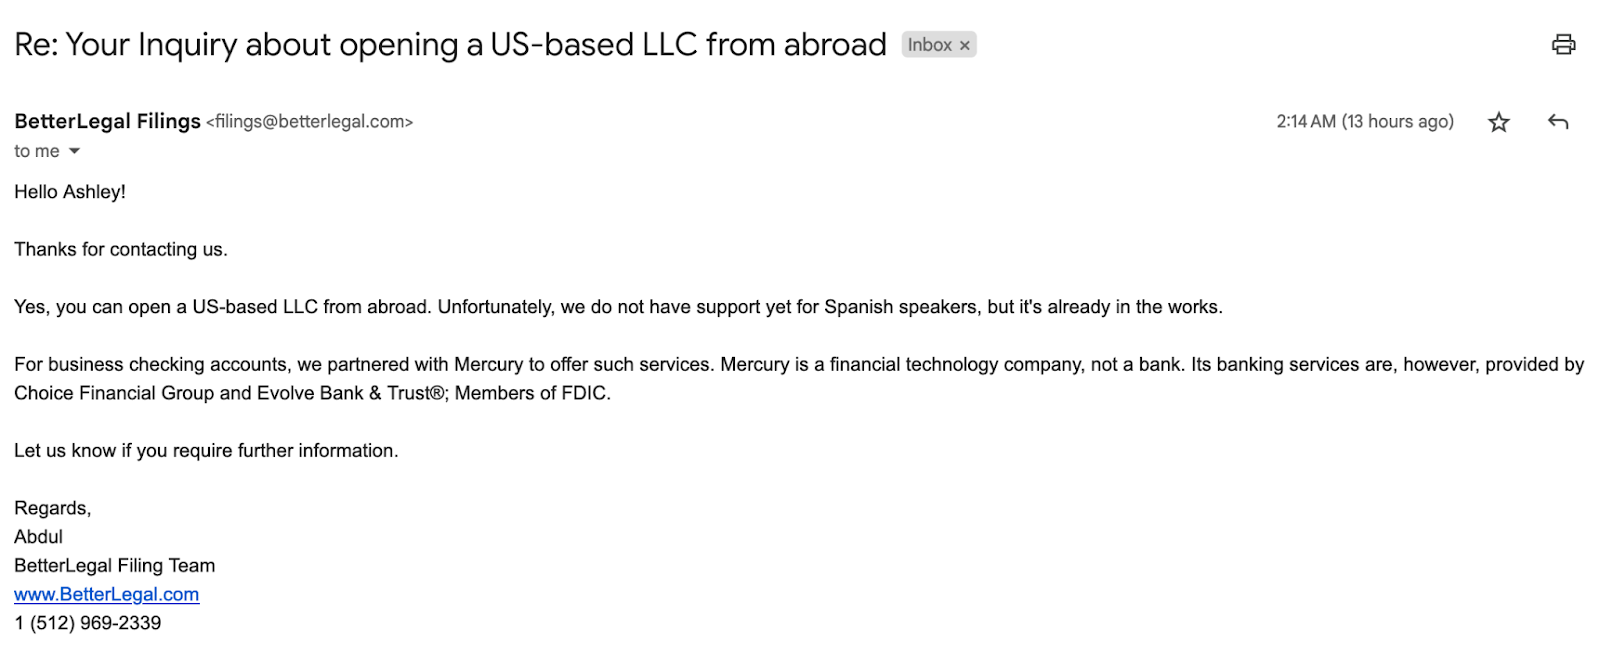 BetterLegal's email support follow up.